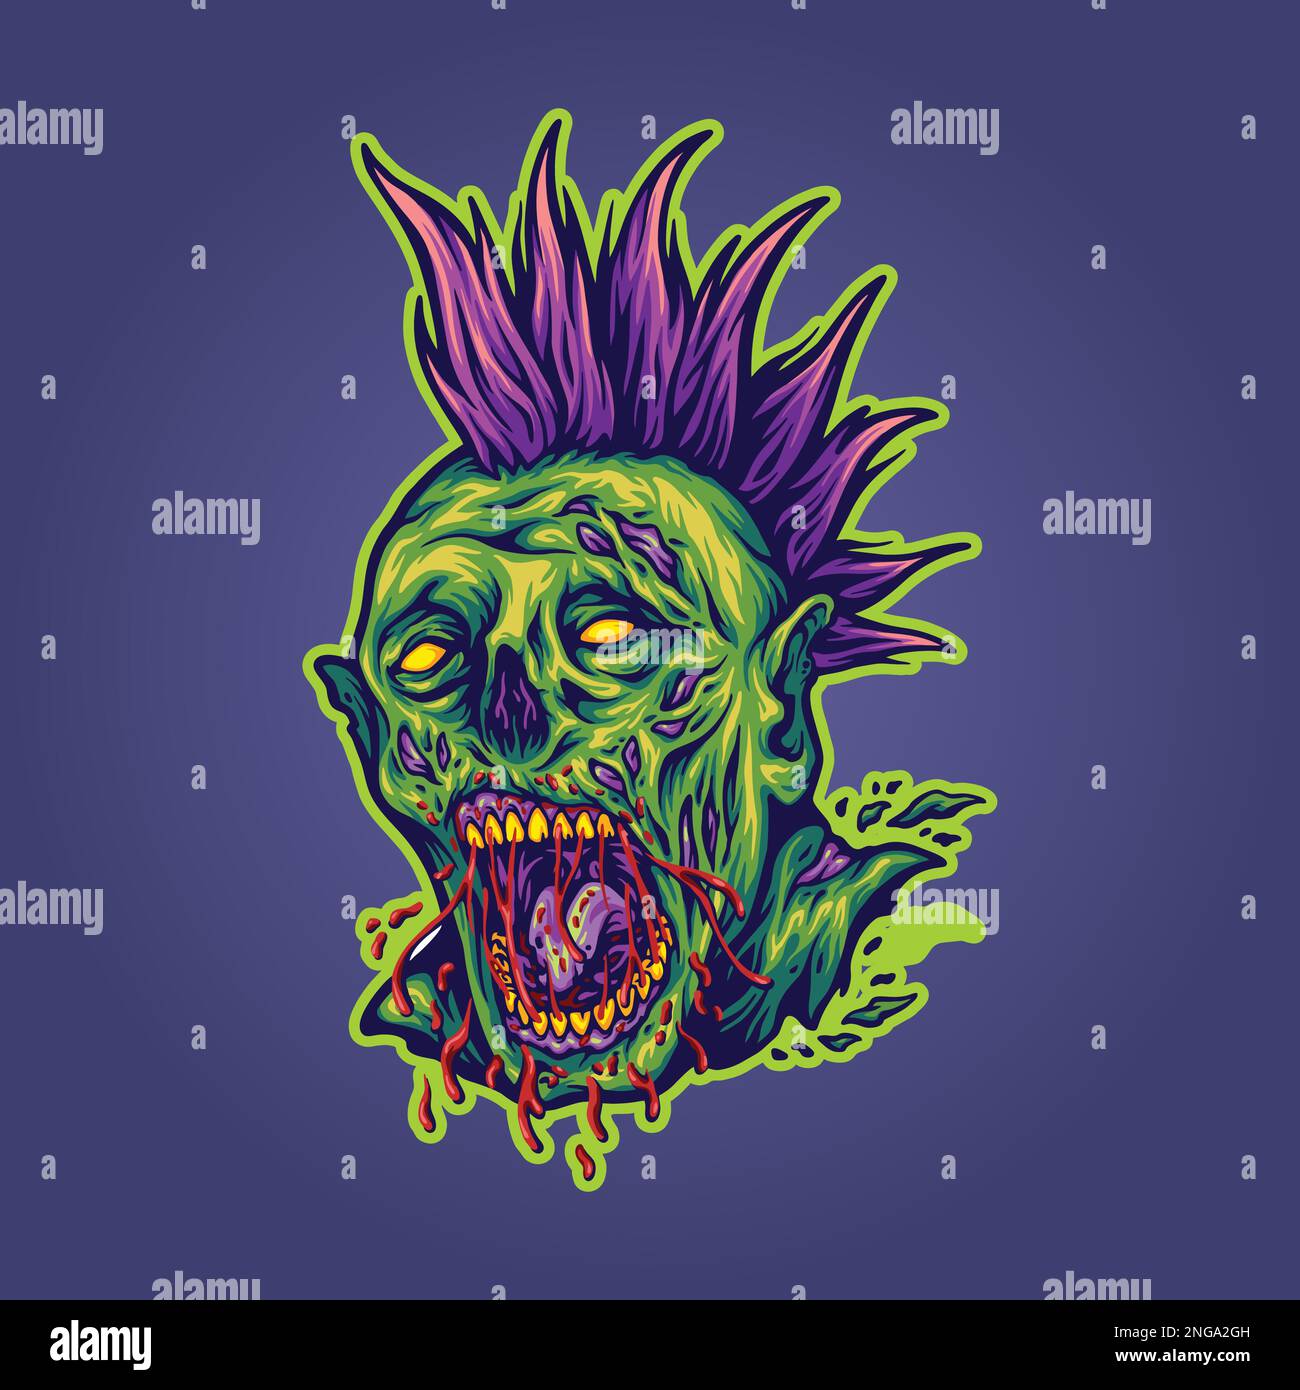 Creepy zombie monster head grunge punk illustration vector illustrations for your work logo, merchandise t-shirt, stickers and label designs, poster Stock Vector